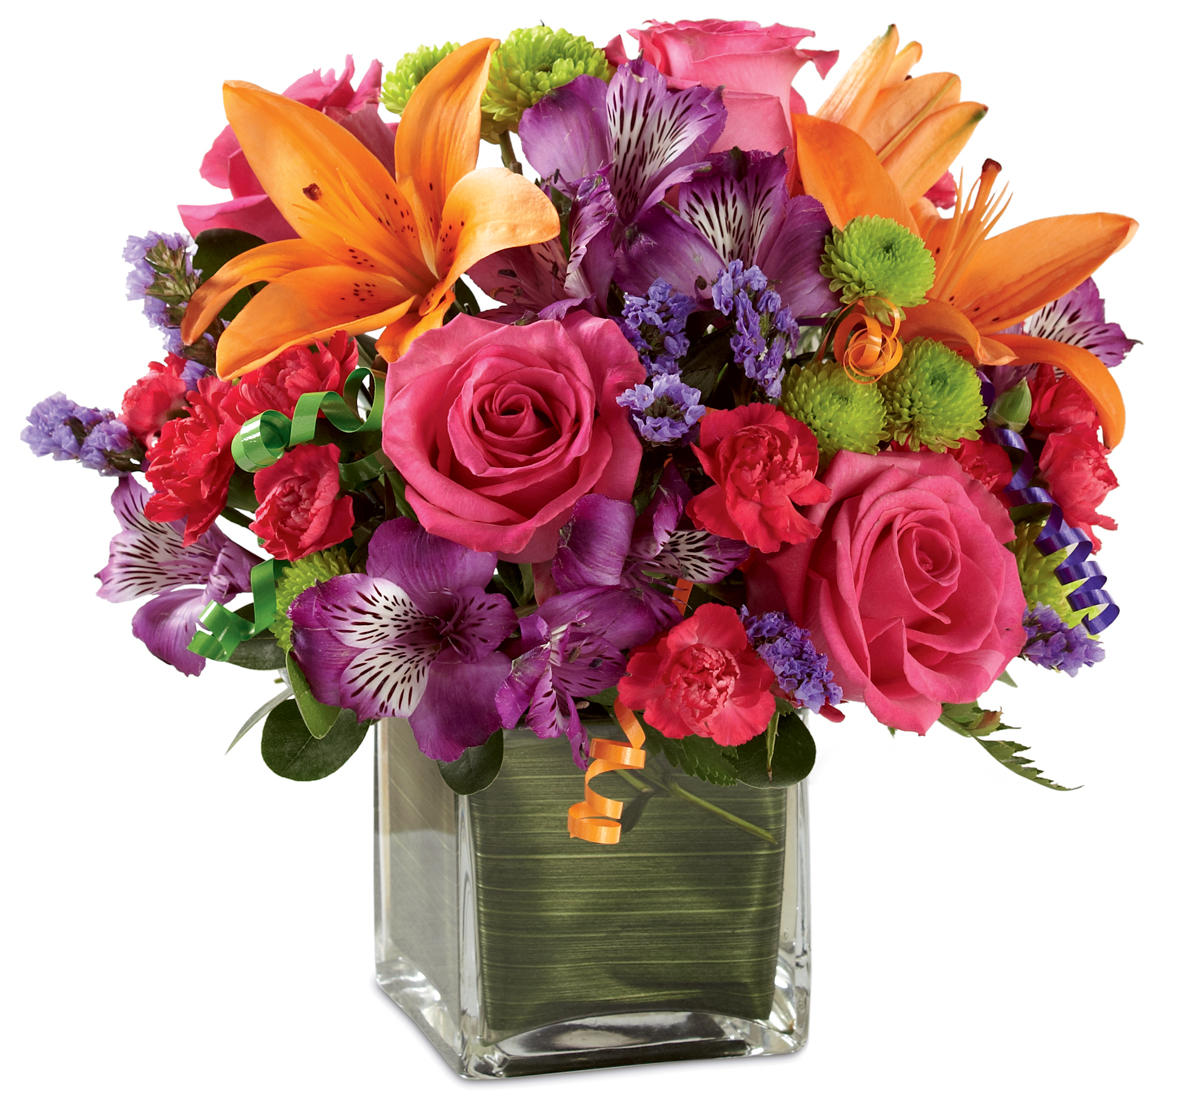 How To Choose The Best Birthday Bouquet Delivery Singapore